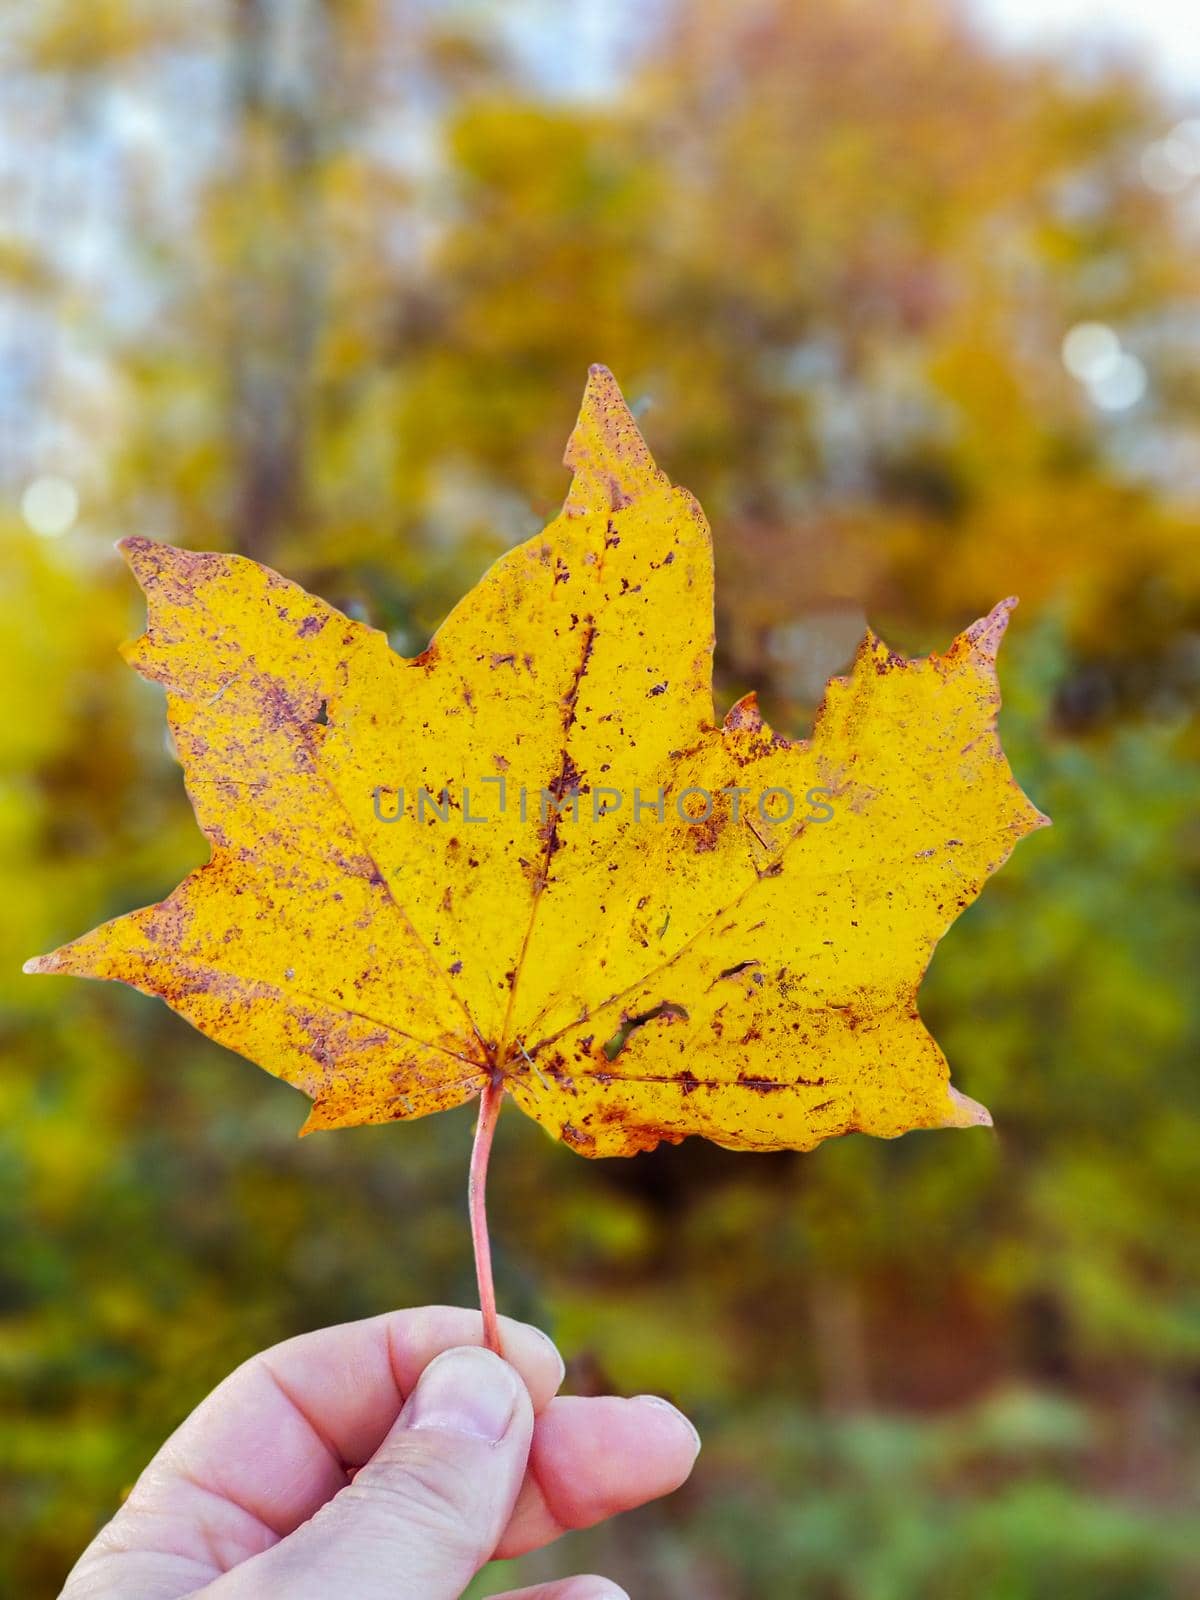 yellow maple leaf in hand, close-up. by zakob337